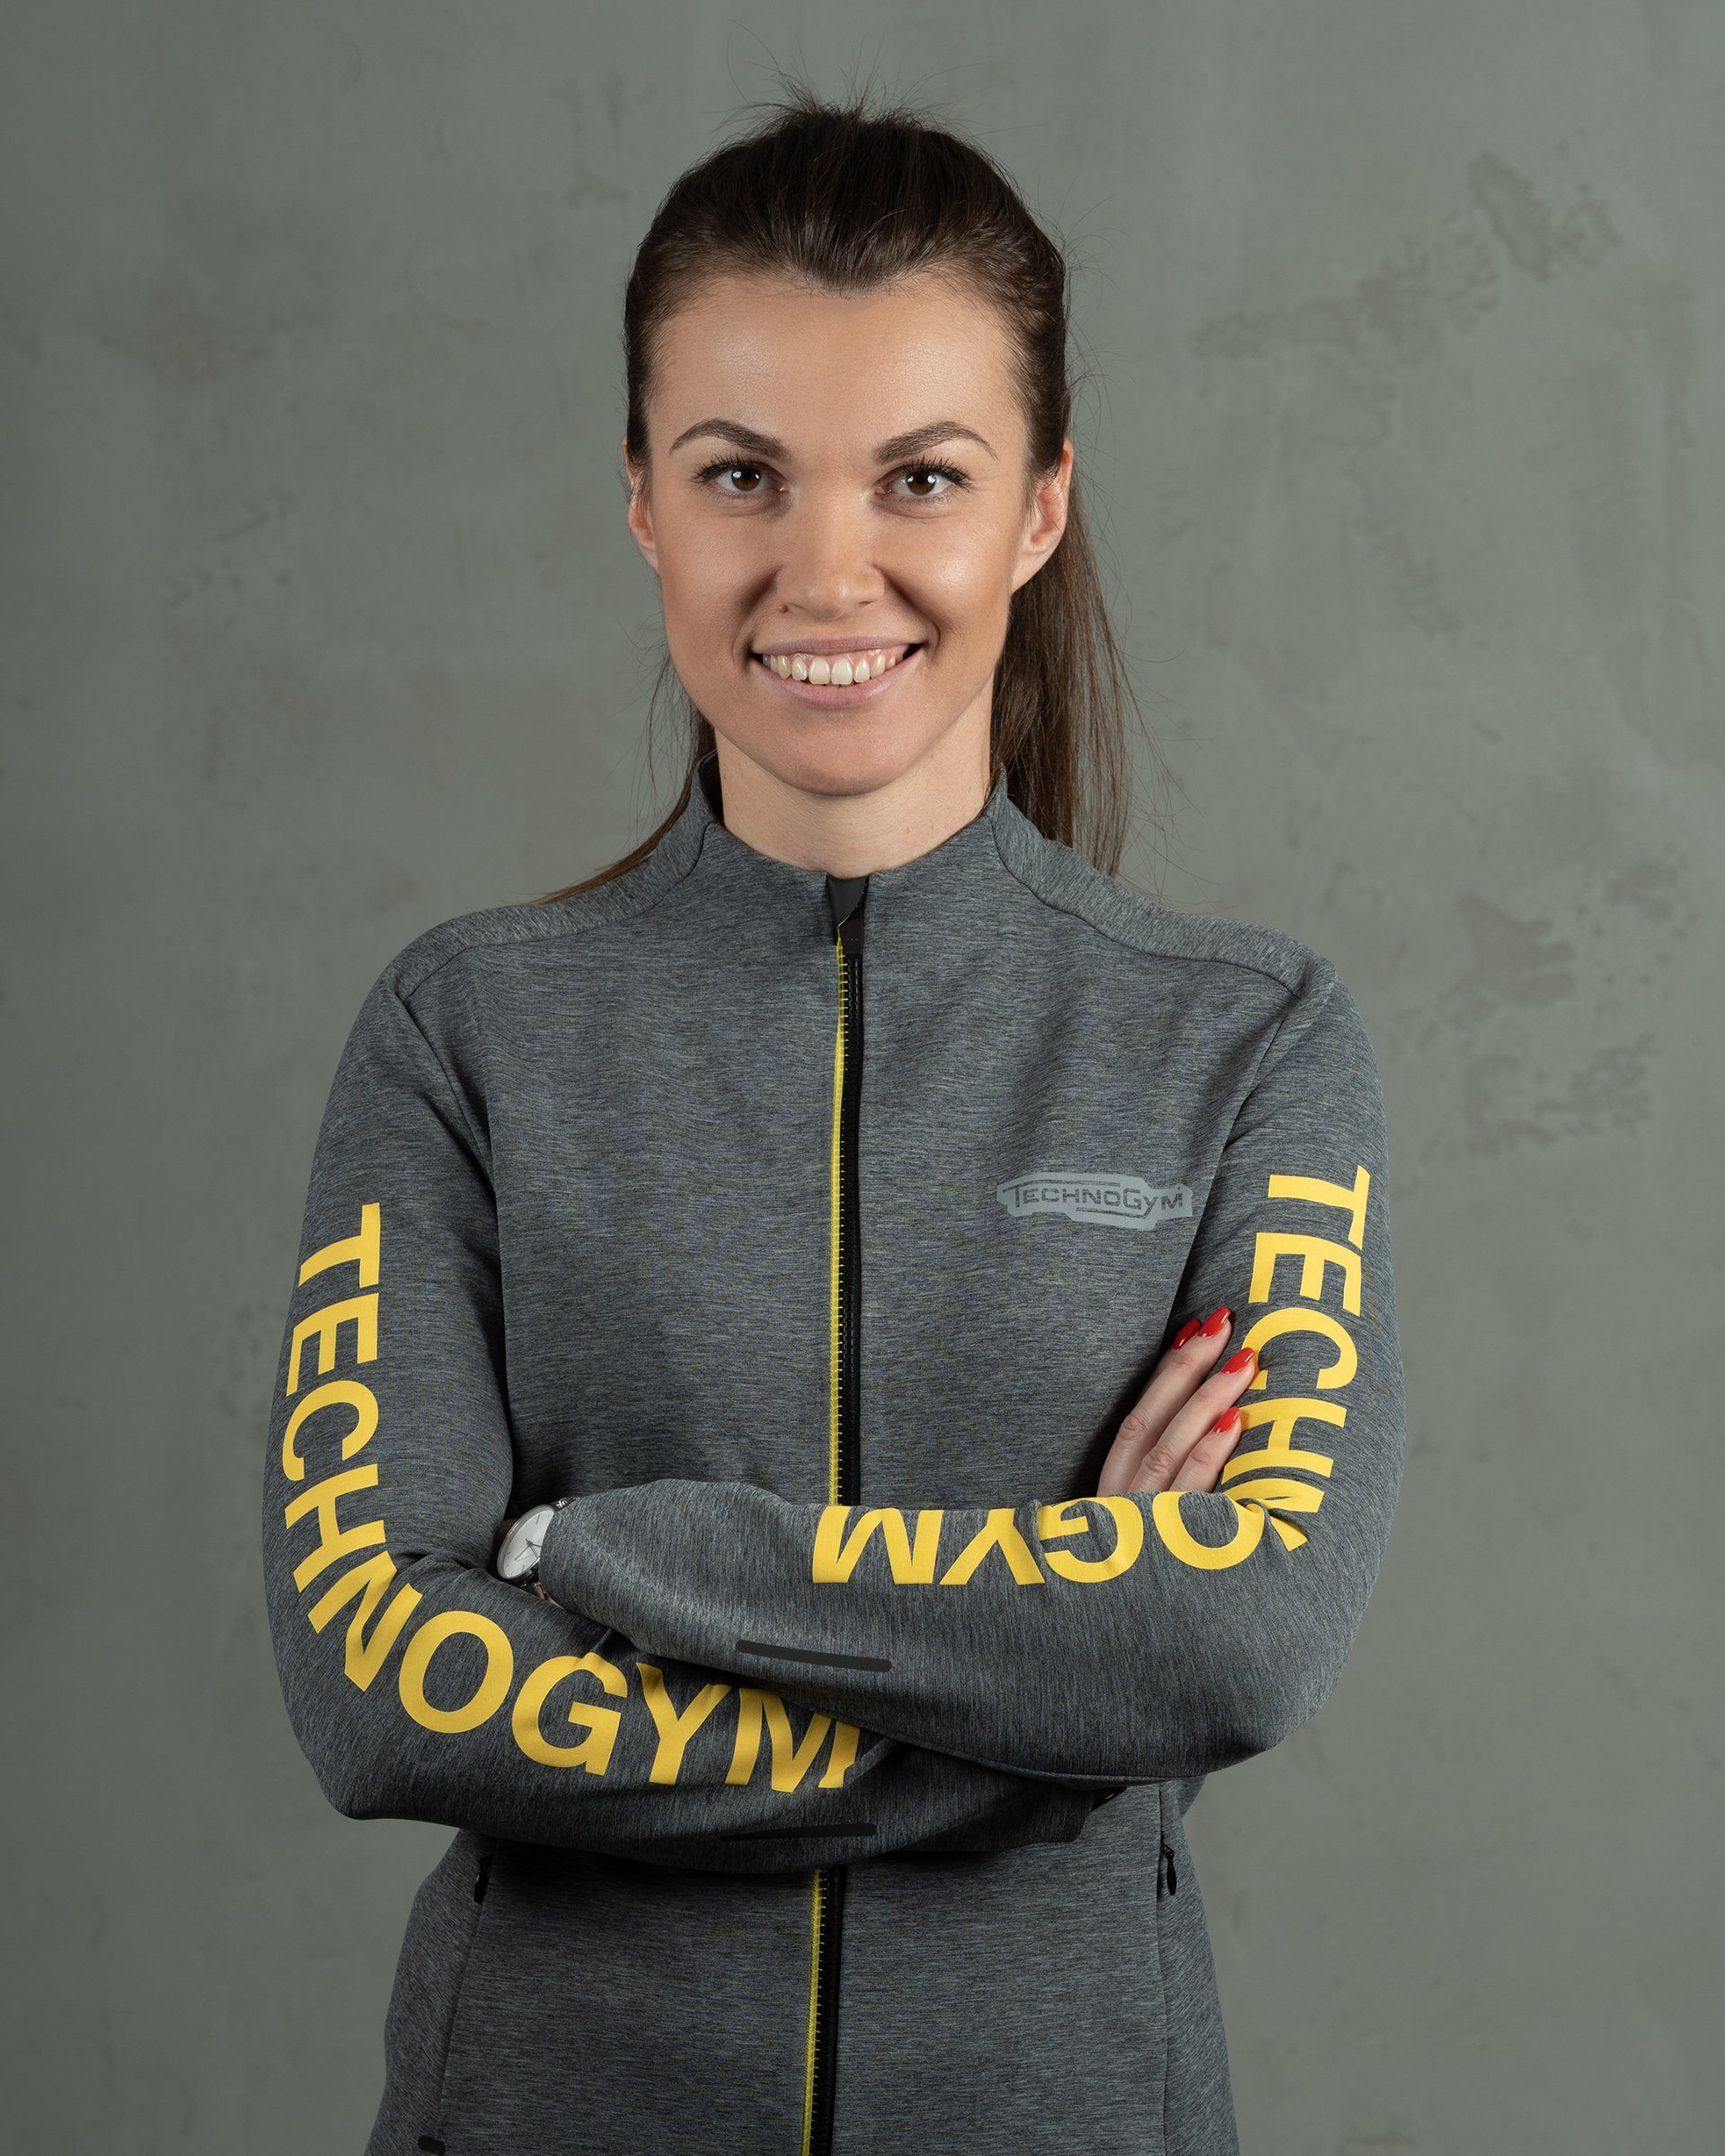 a woman wearing a jacket that says technogym on the sleeves